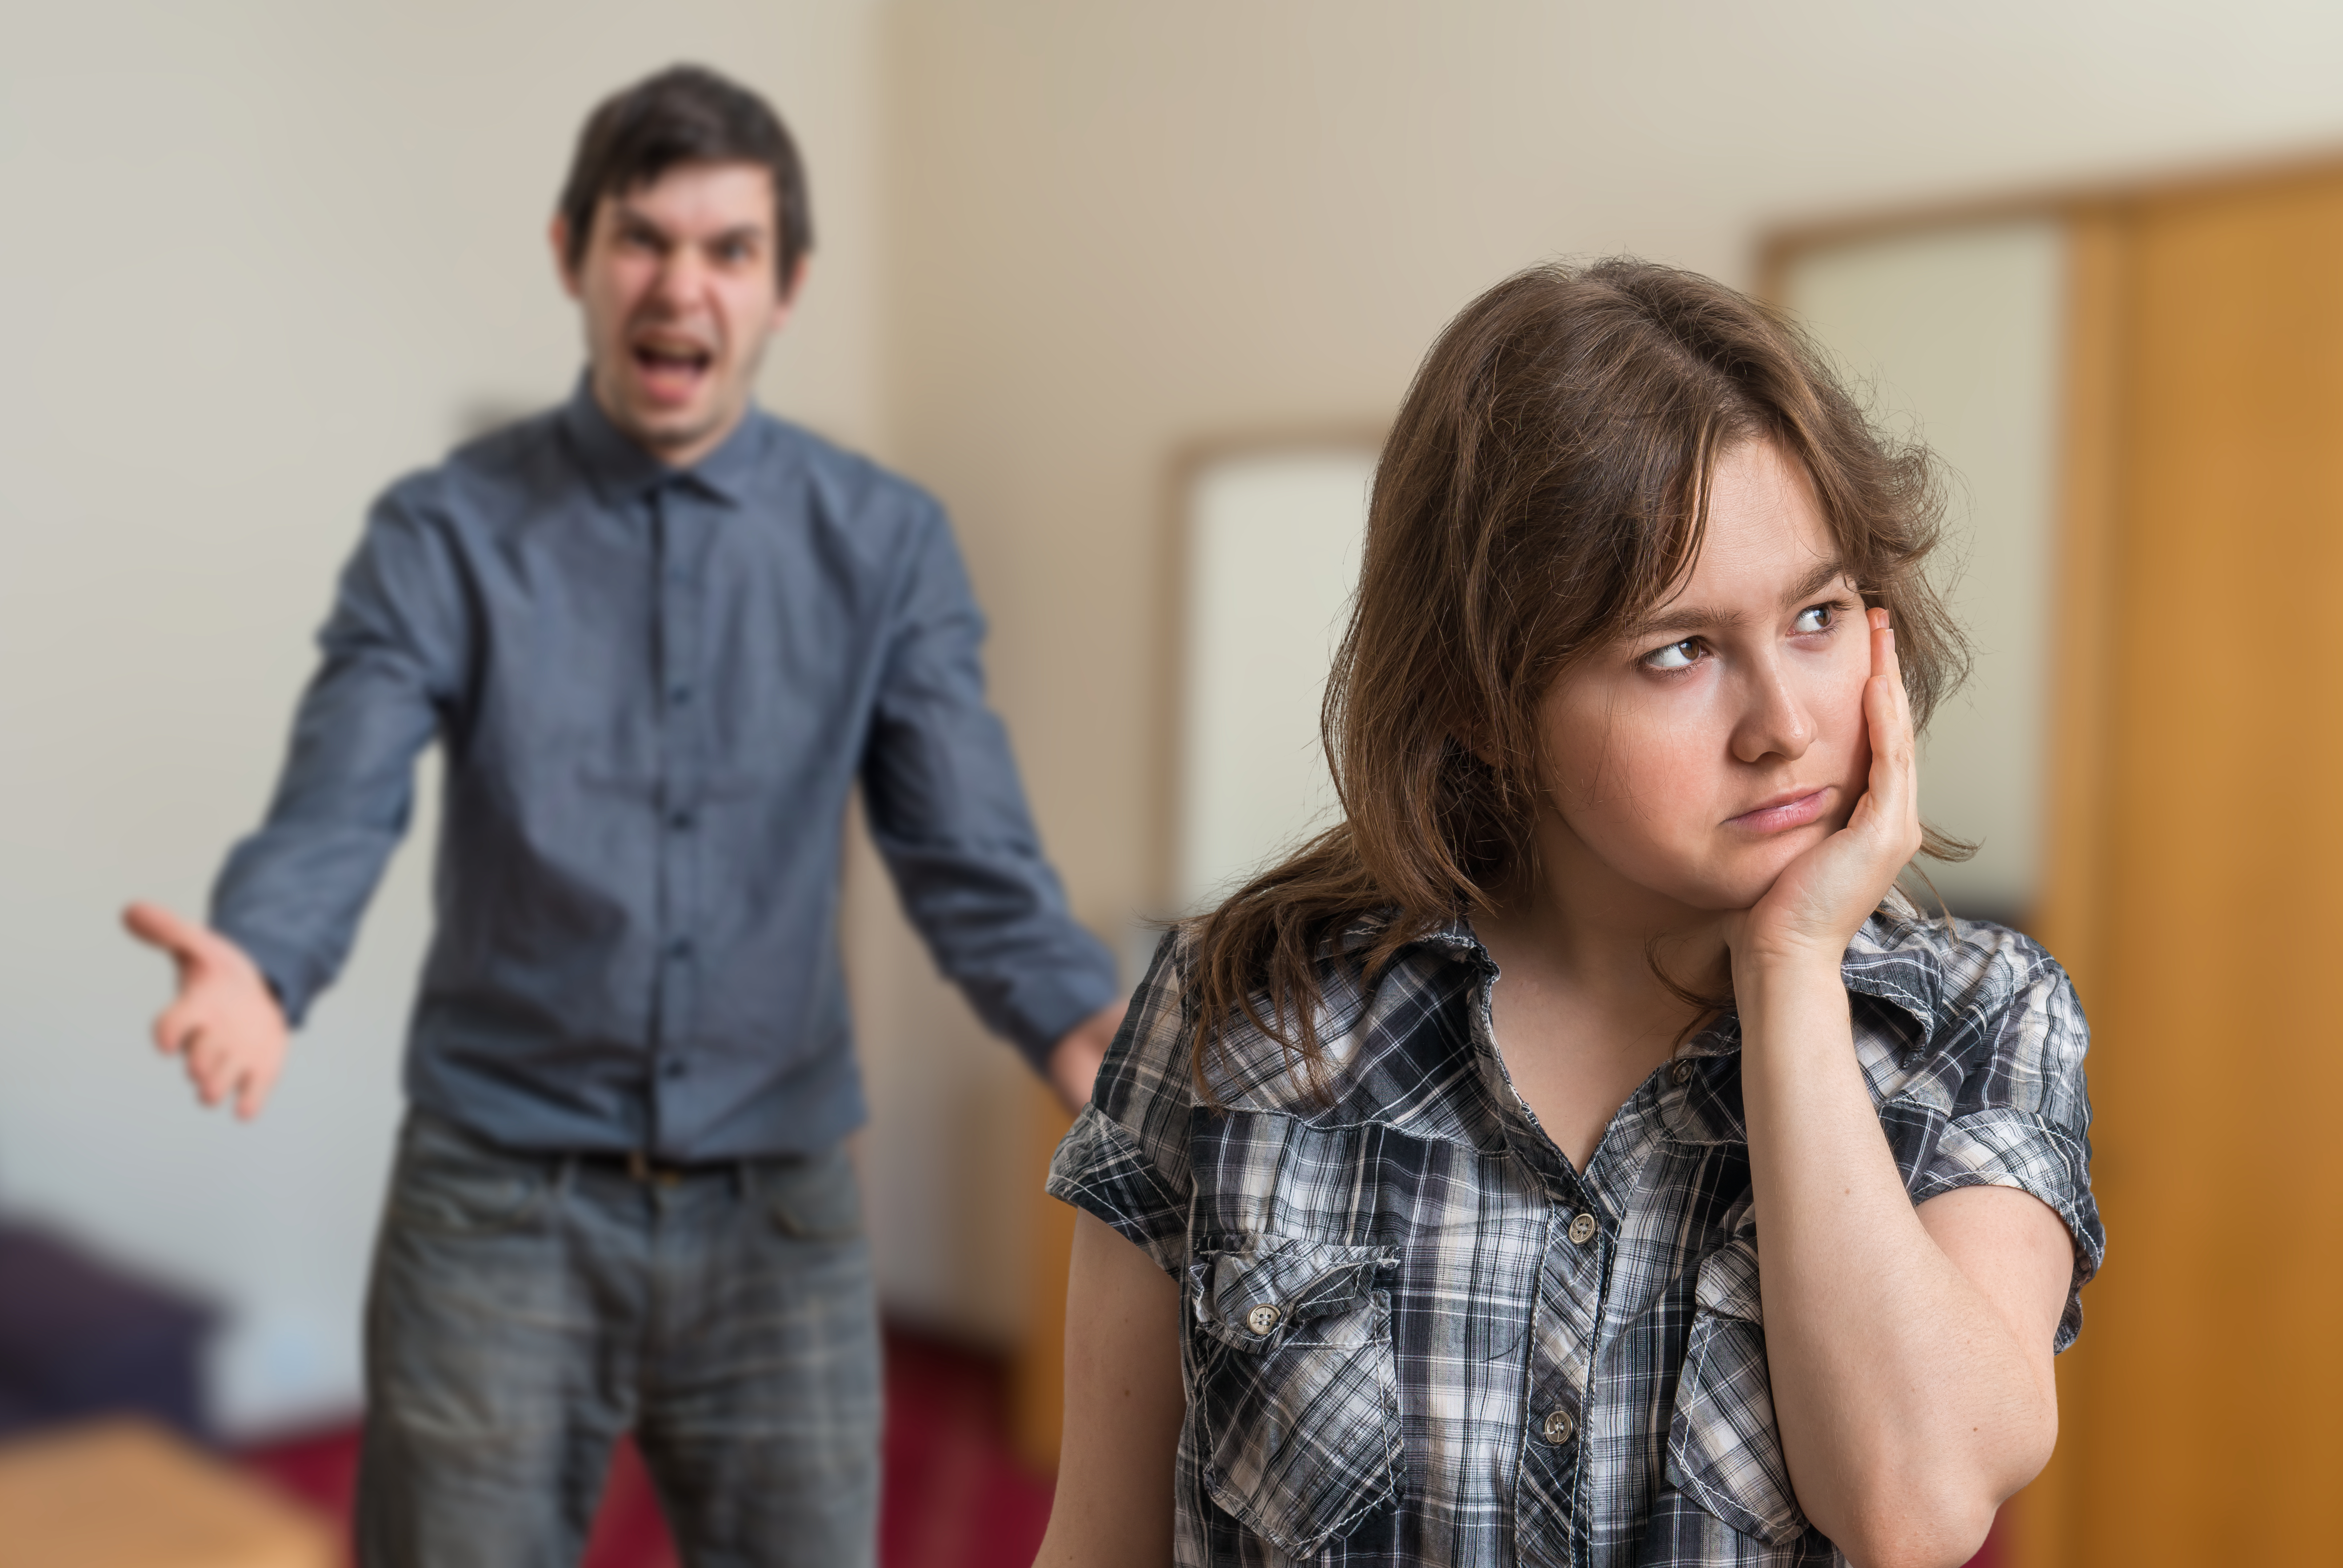 A man yelling at a woman | Source: Shutterstock